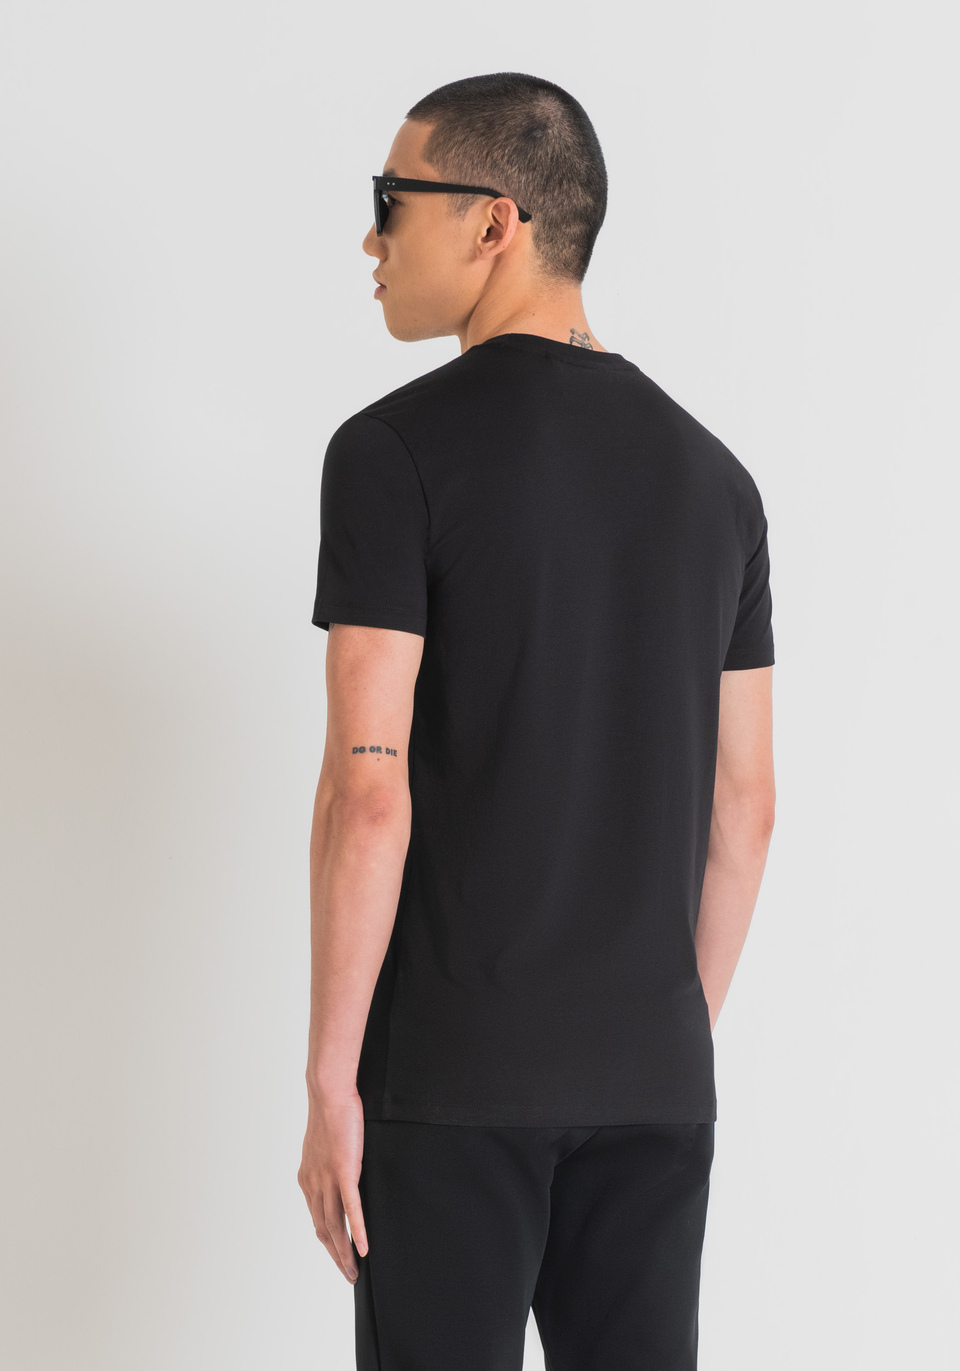 SUPER SLIM FIT T-SHIRT IN STRETCH COTTON WITH RUBBERISED LOGO PRINT - Antony Morato Online Shop